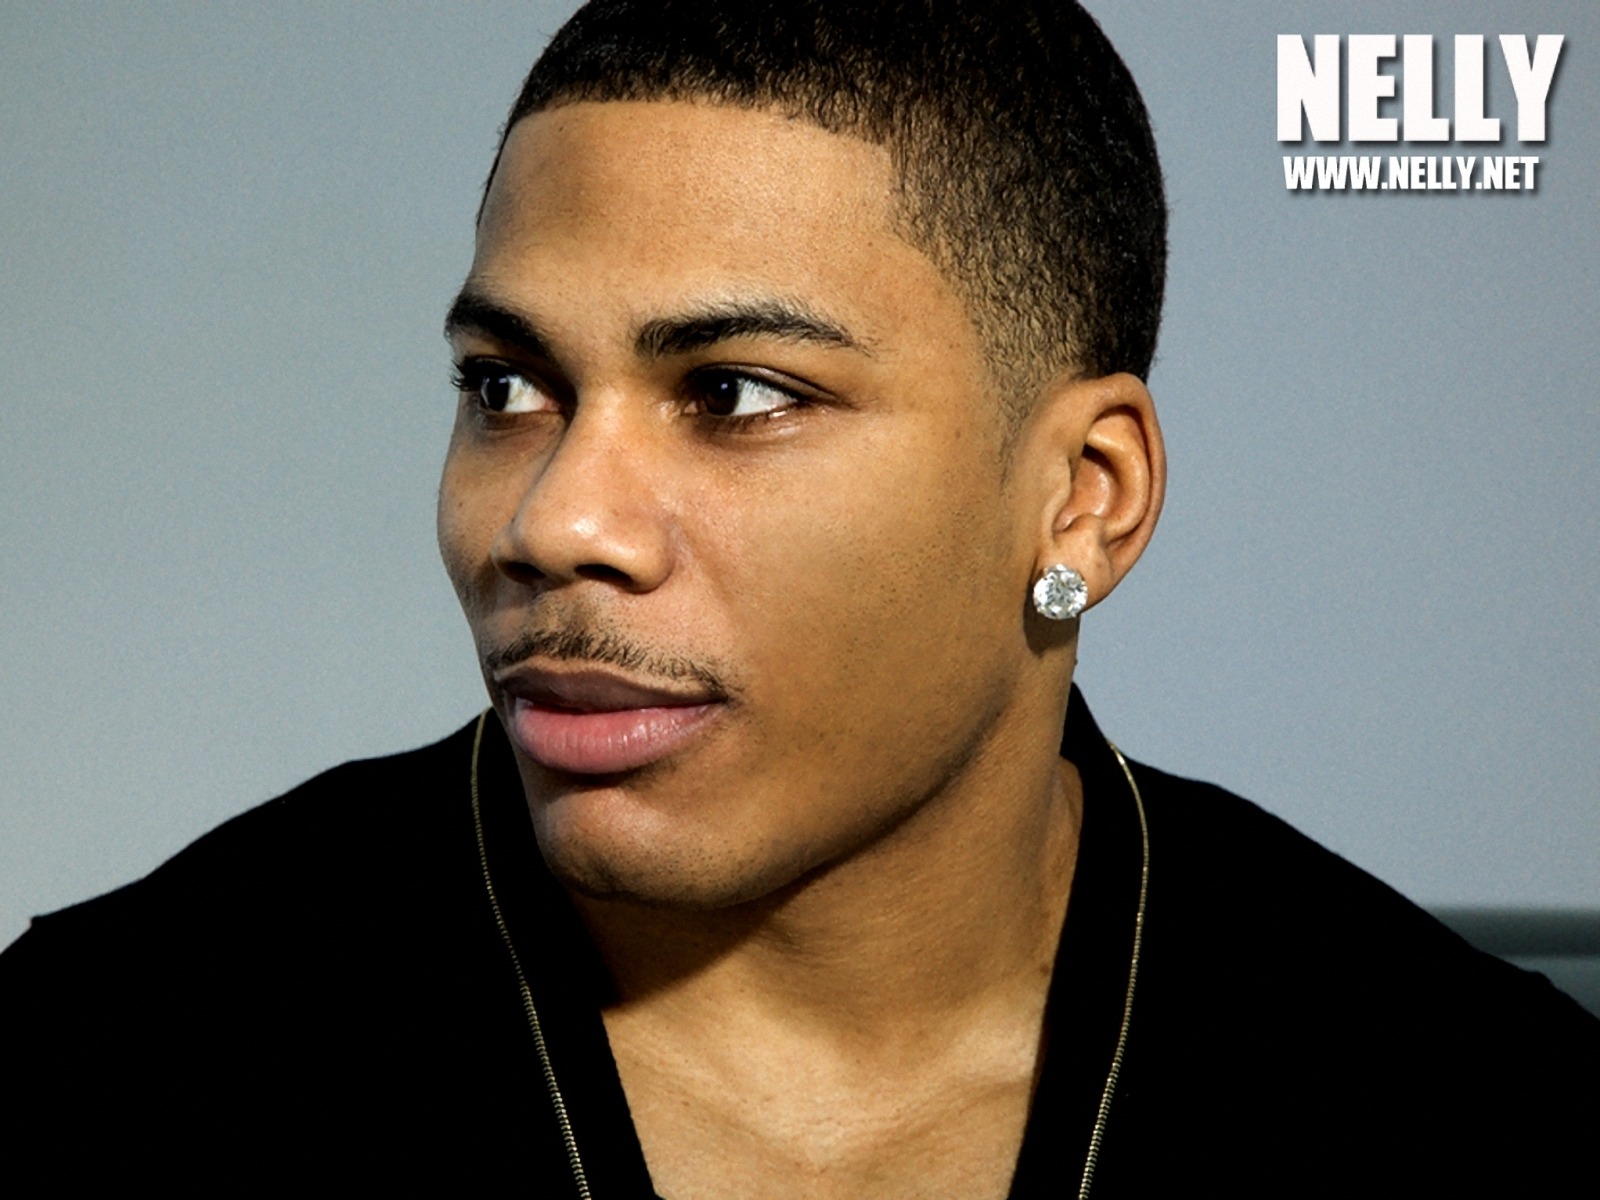 Nelly Wallpaper Pictures